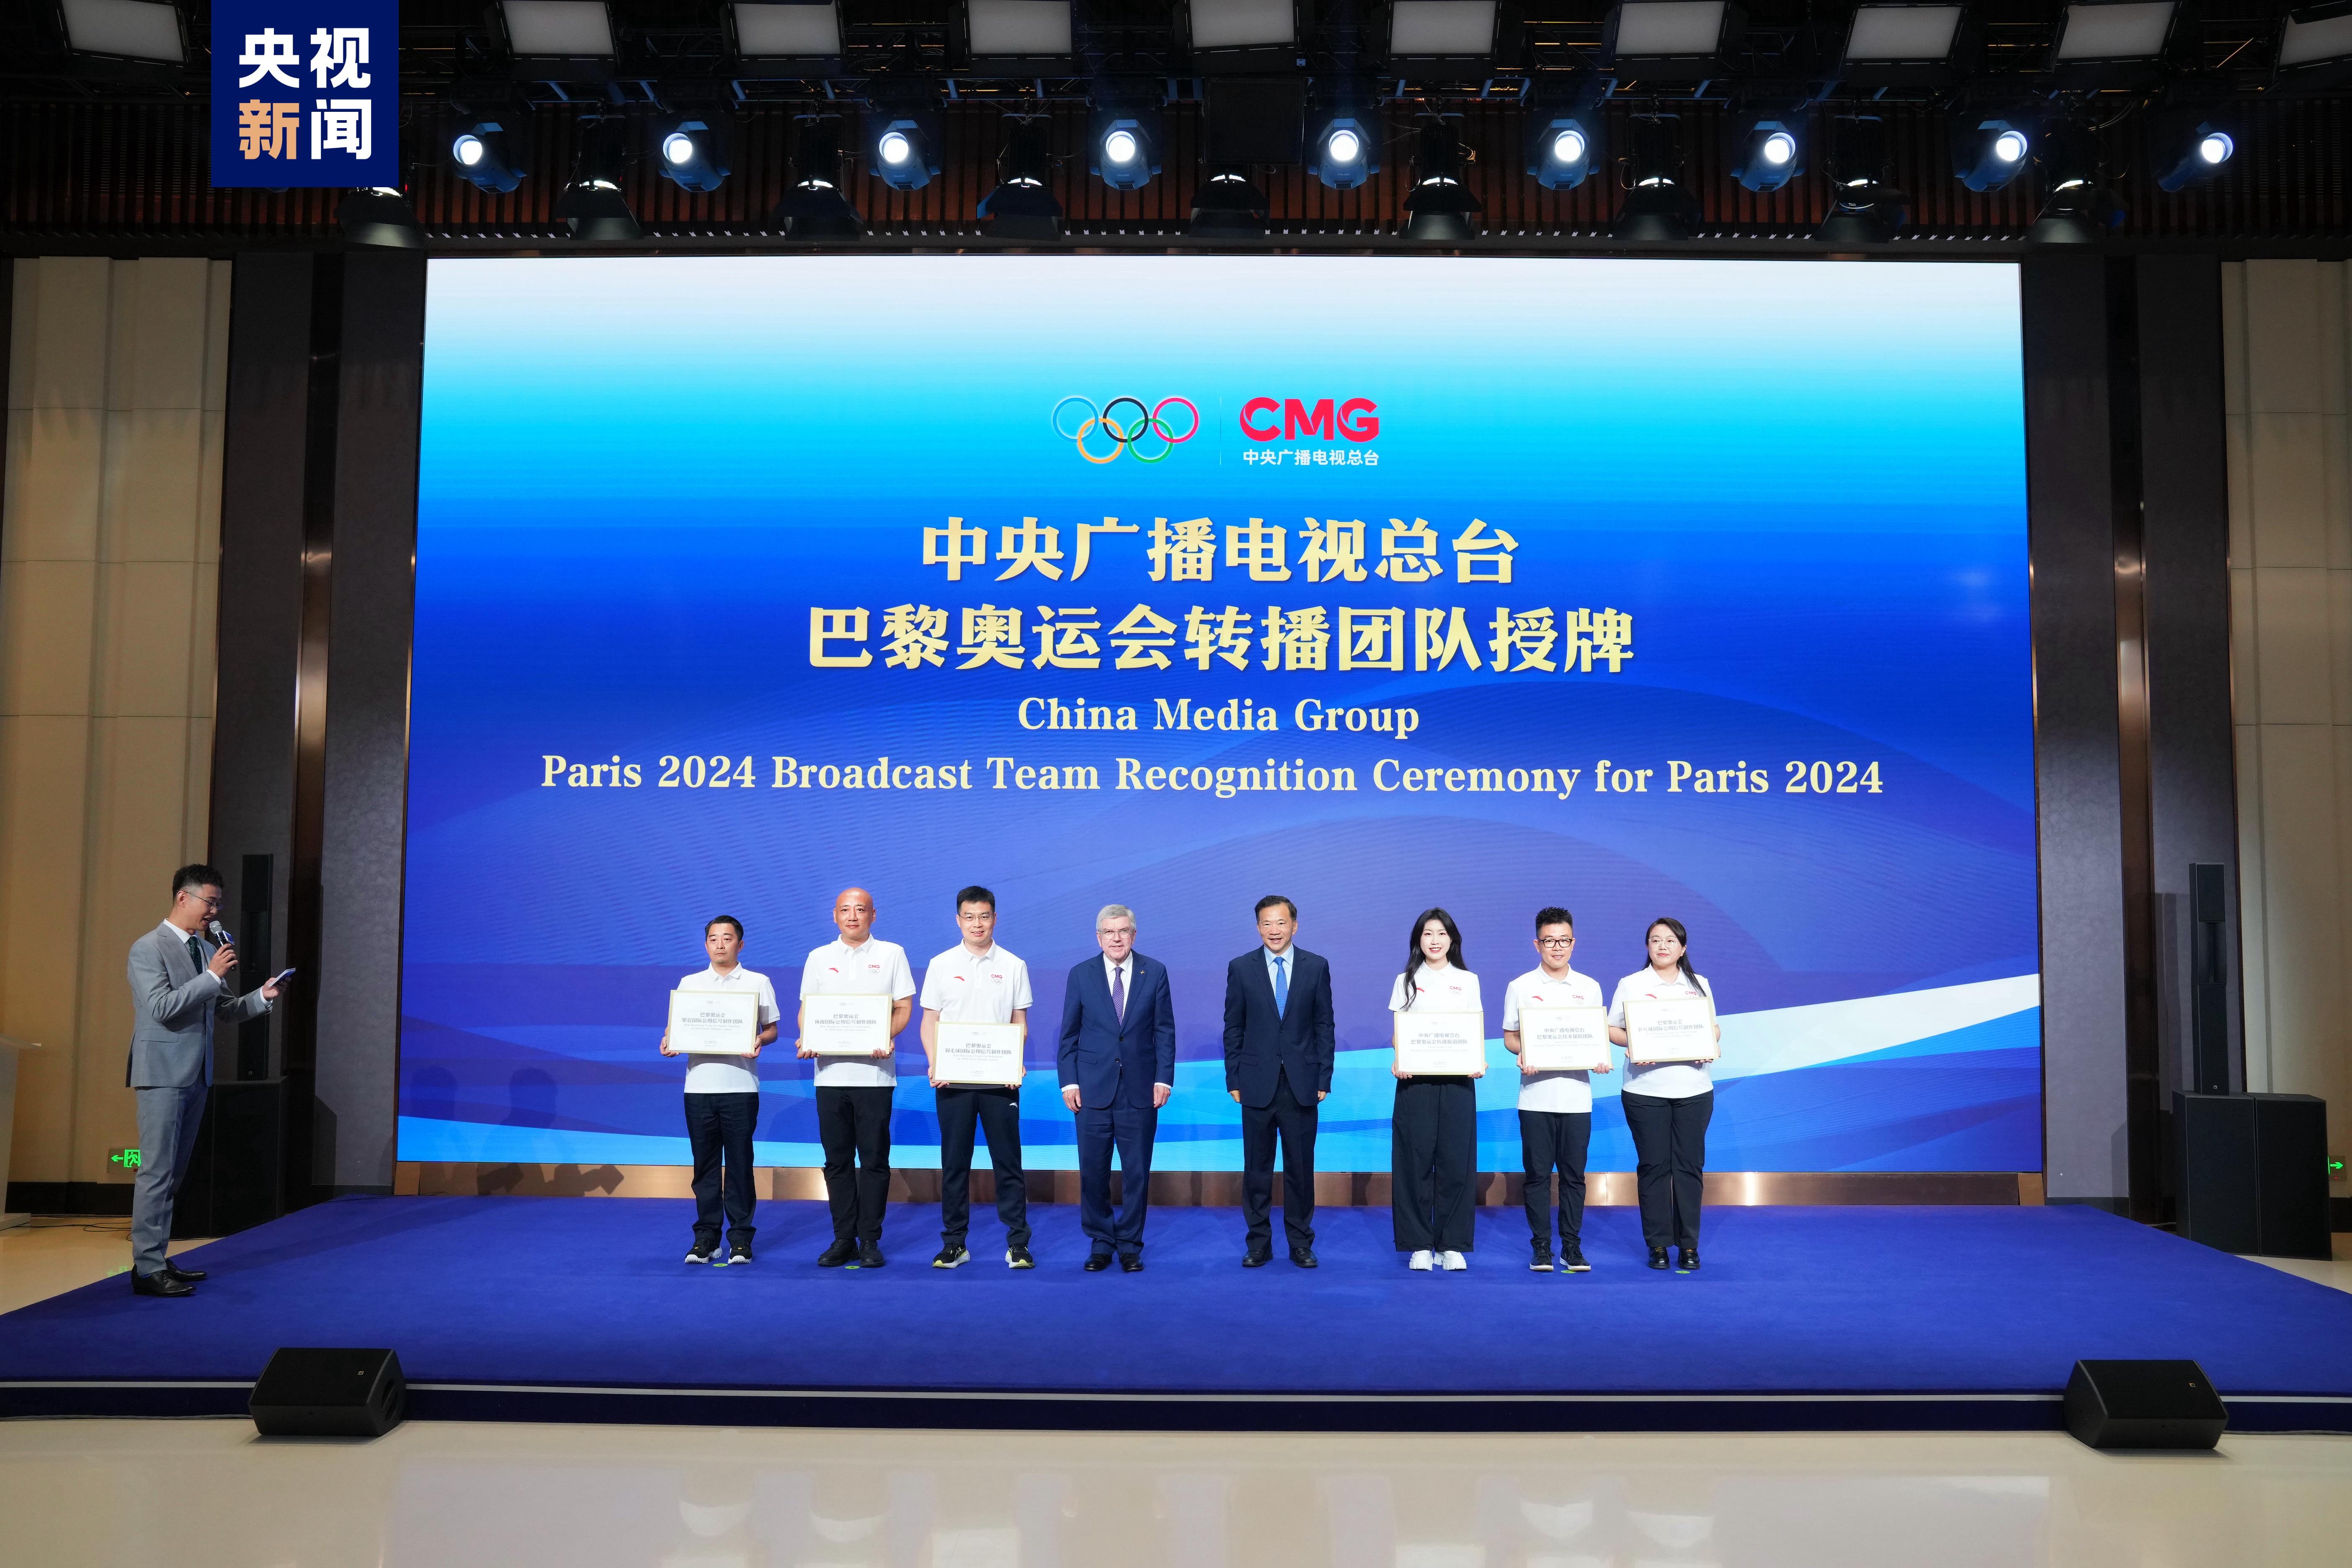 China Media Group Paris 2024 Broadcast Team Recognition Ceremony for Paris 2024 in Shanghai City, May 19, 2024. /CMG